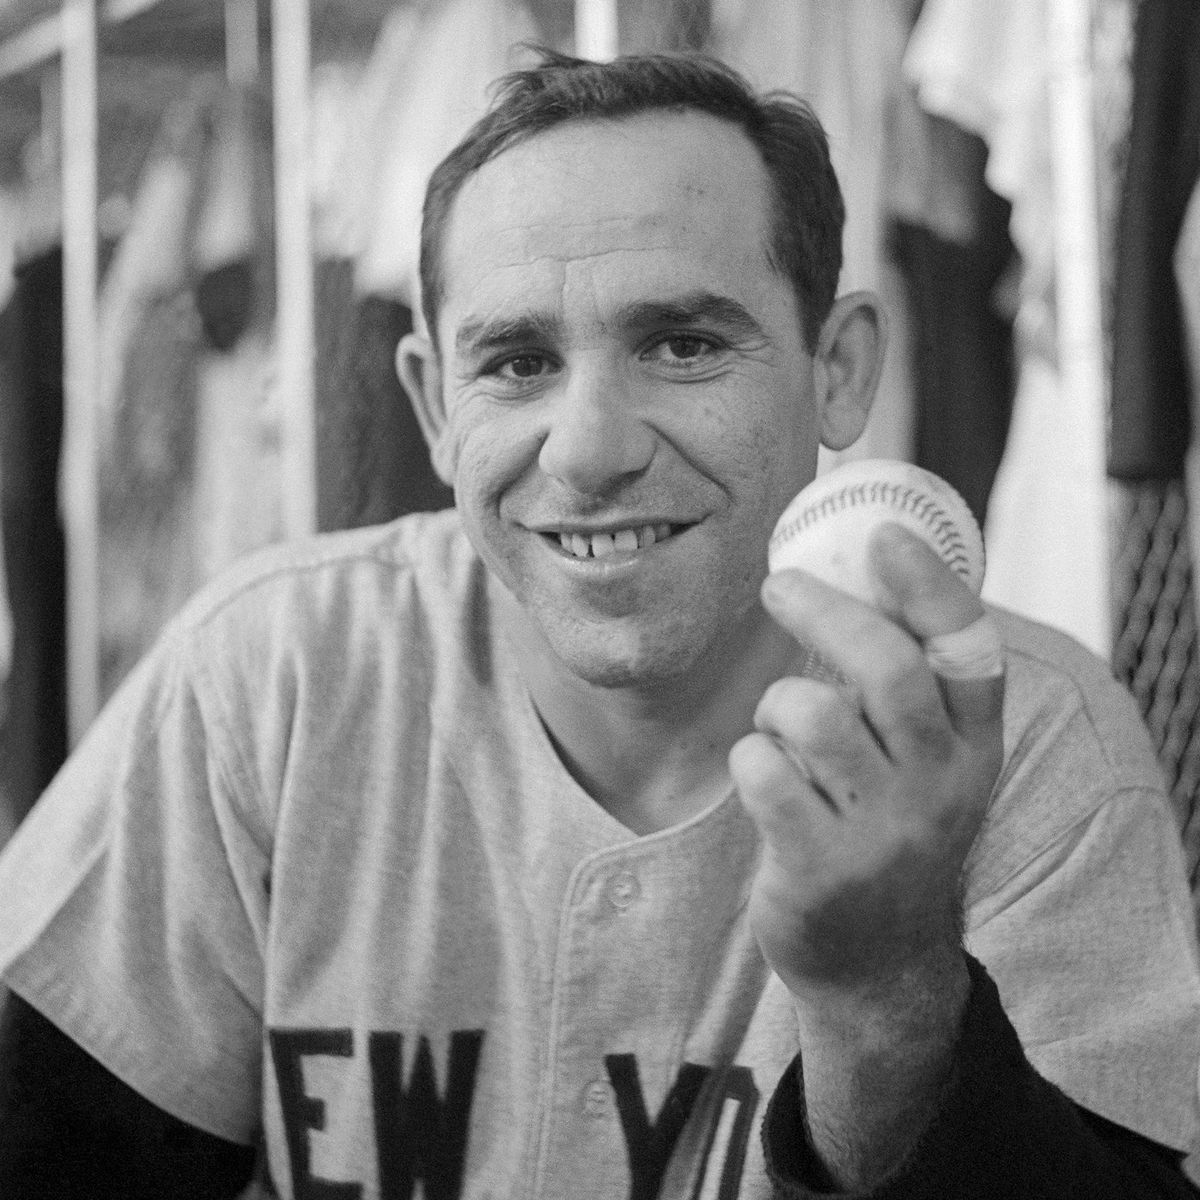 Yogi Berra Holding Home Run Record Setting Baseball(Original Caption) Yankee Yogi Berra set a new home-run record for catchers when he hit the 237th homer of his career during the 5th inning of the New York-Detroit game on September 14th. In this photograph, Berra holds the ball which he hit to make the new record.